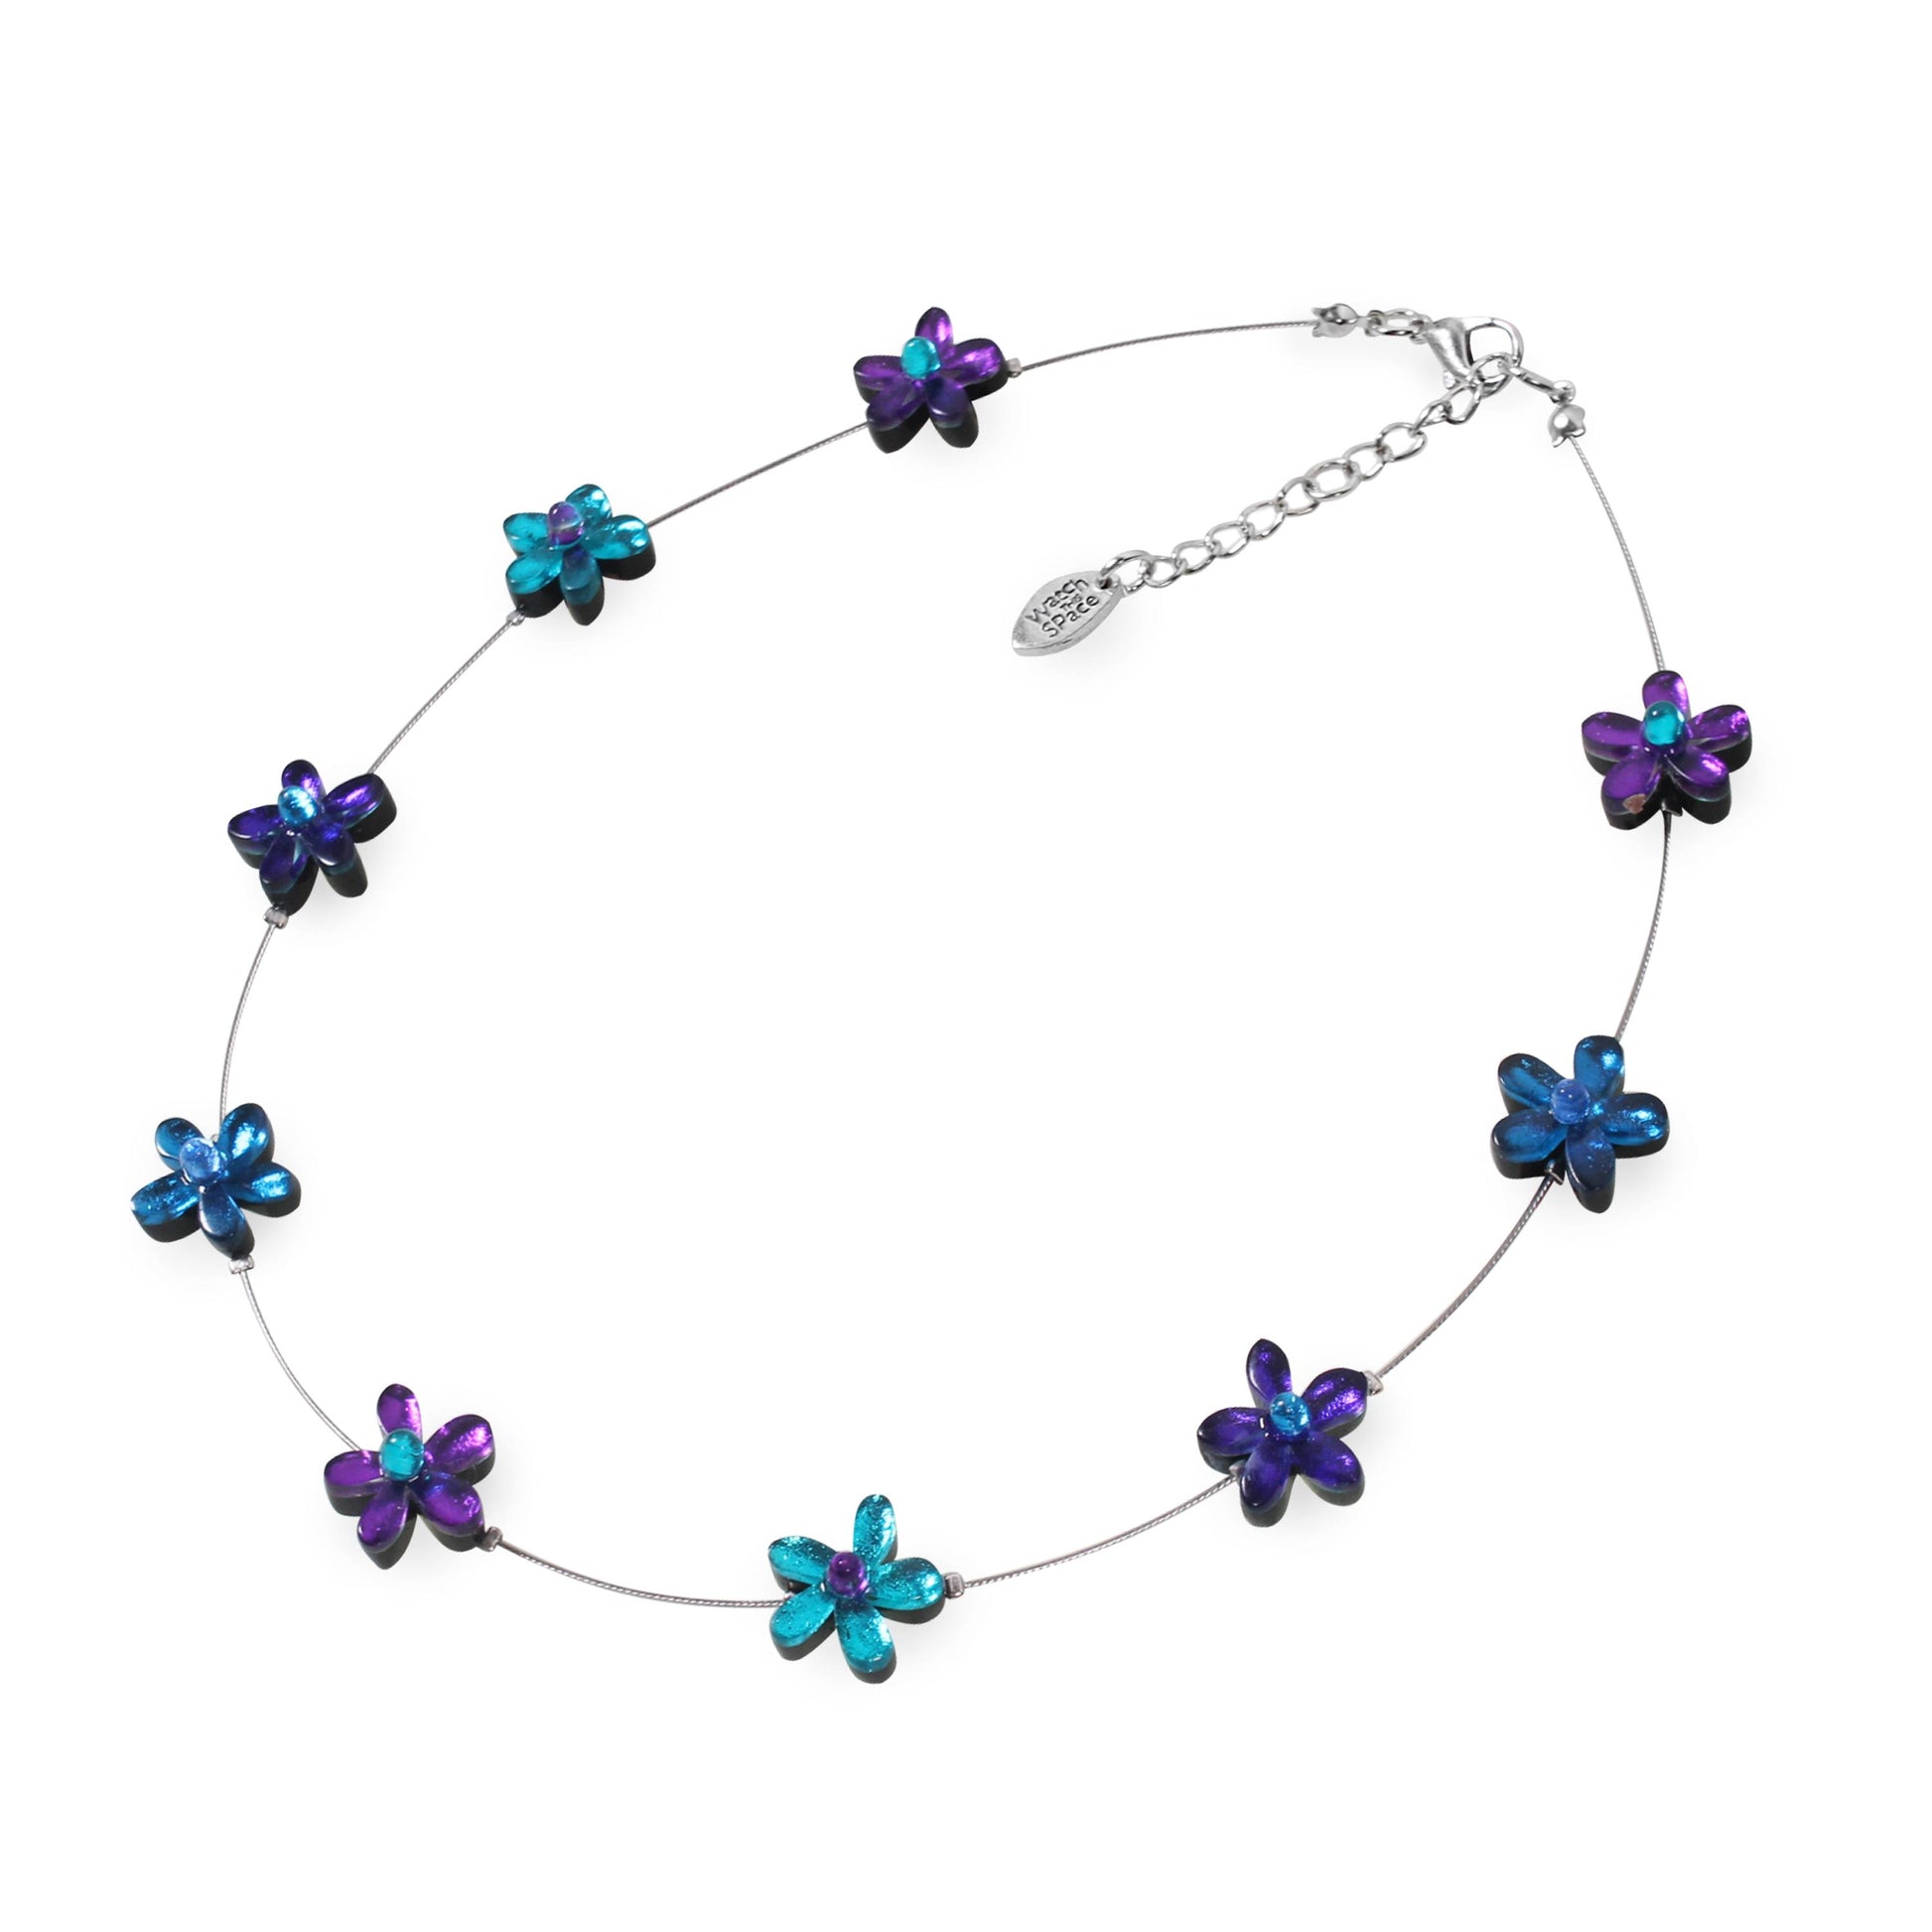 Peacock Flower Shiny Floating Necklace